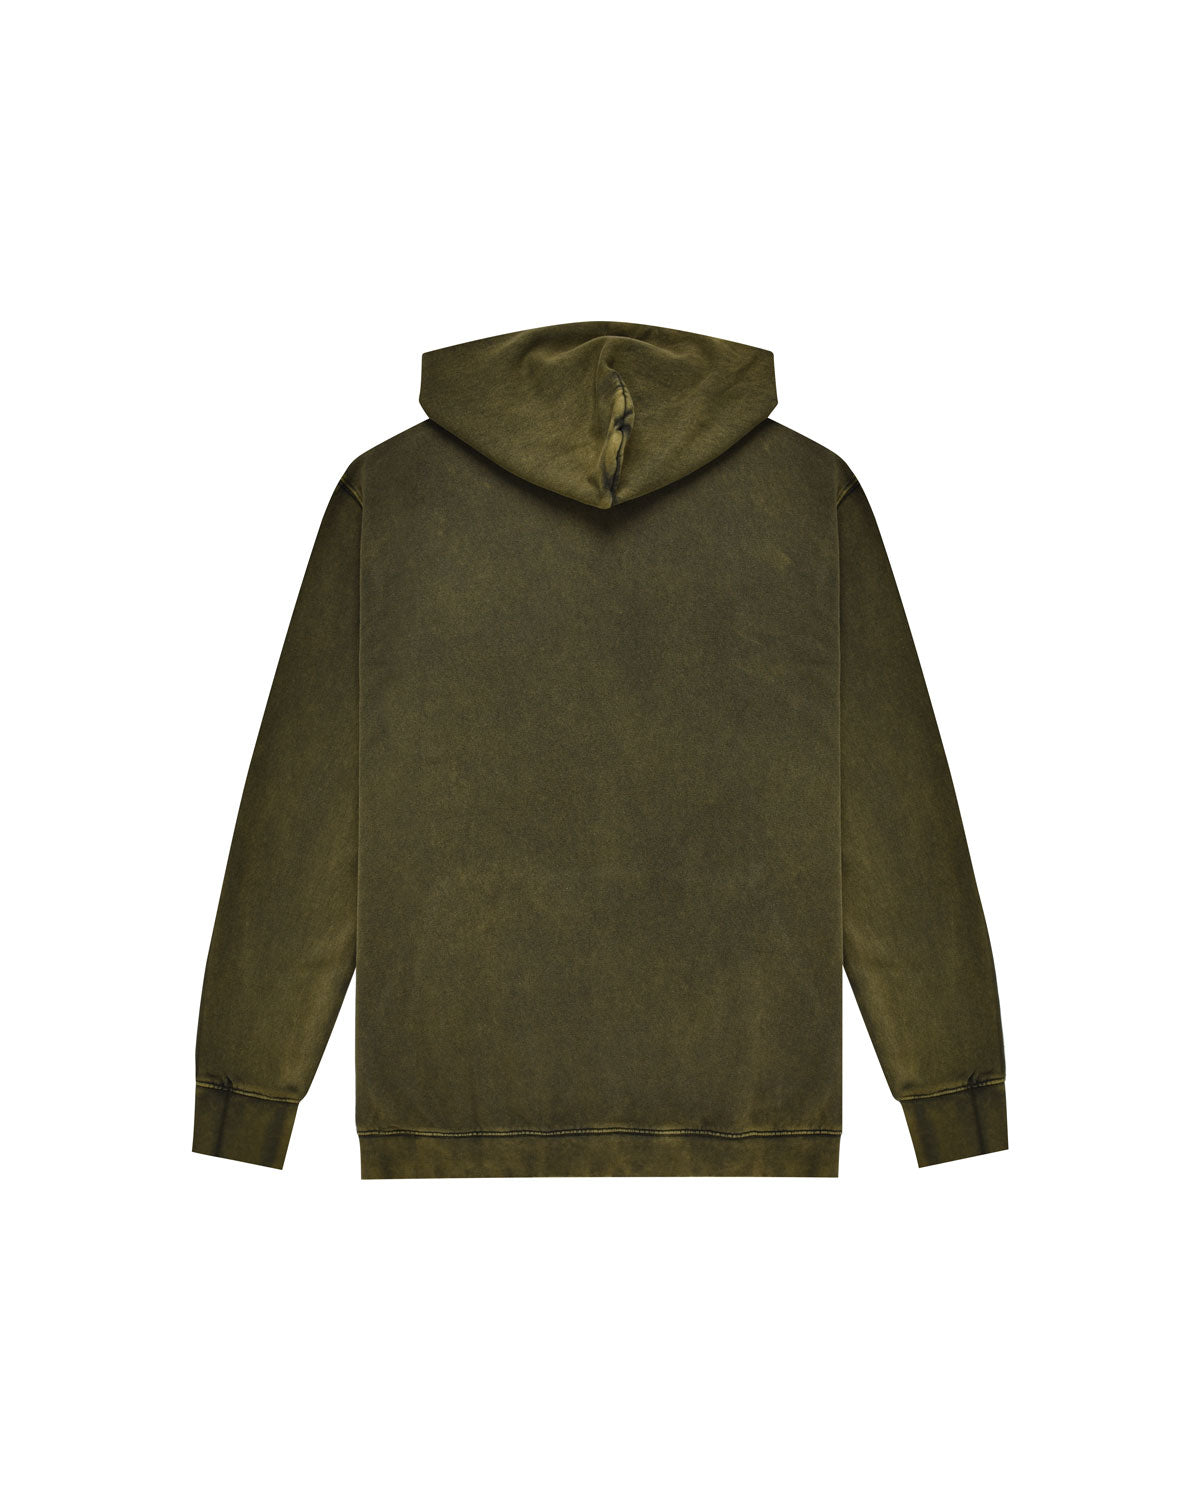 Man | Washed effect sweatshirt in yellow color with hood in 100% cotton